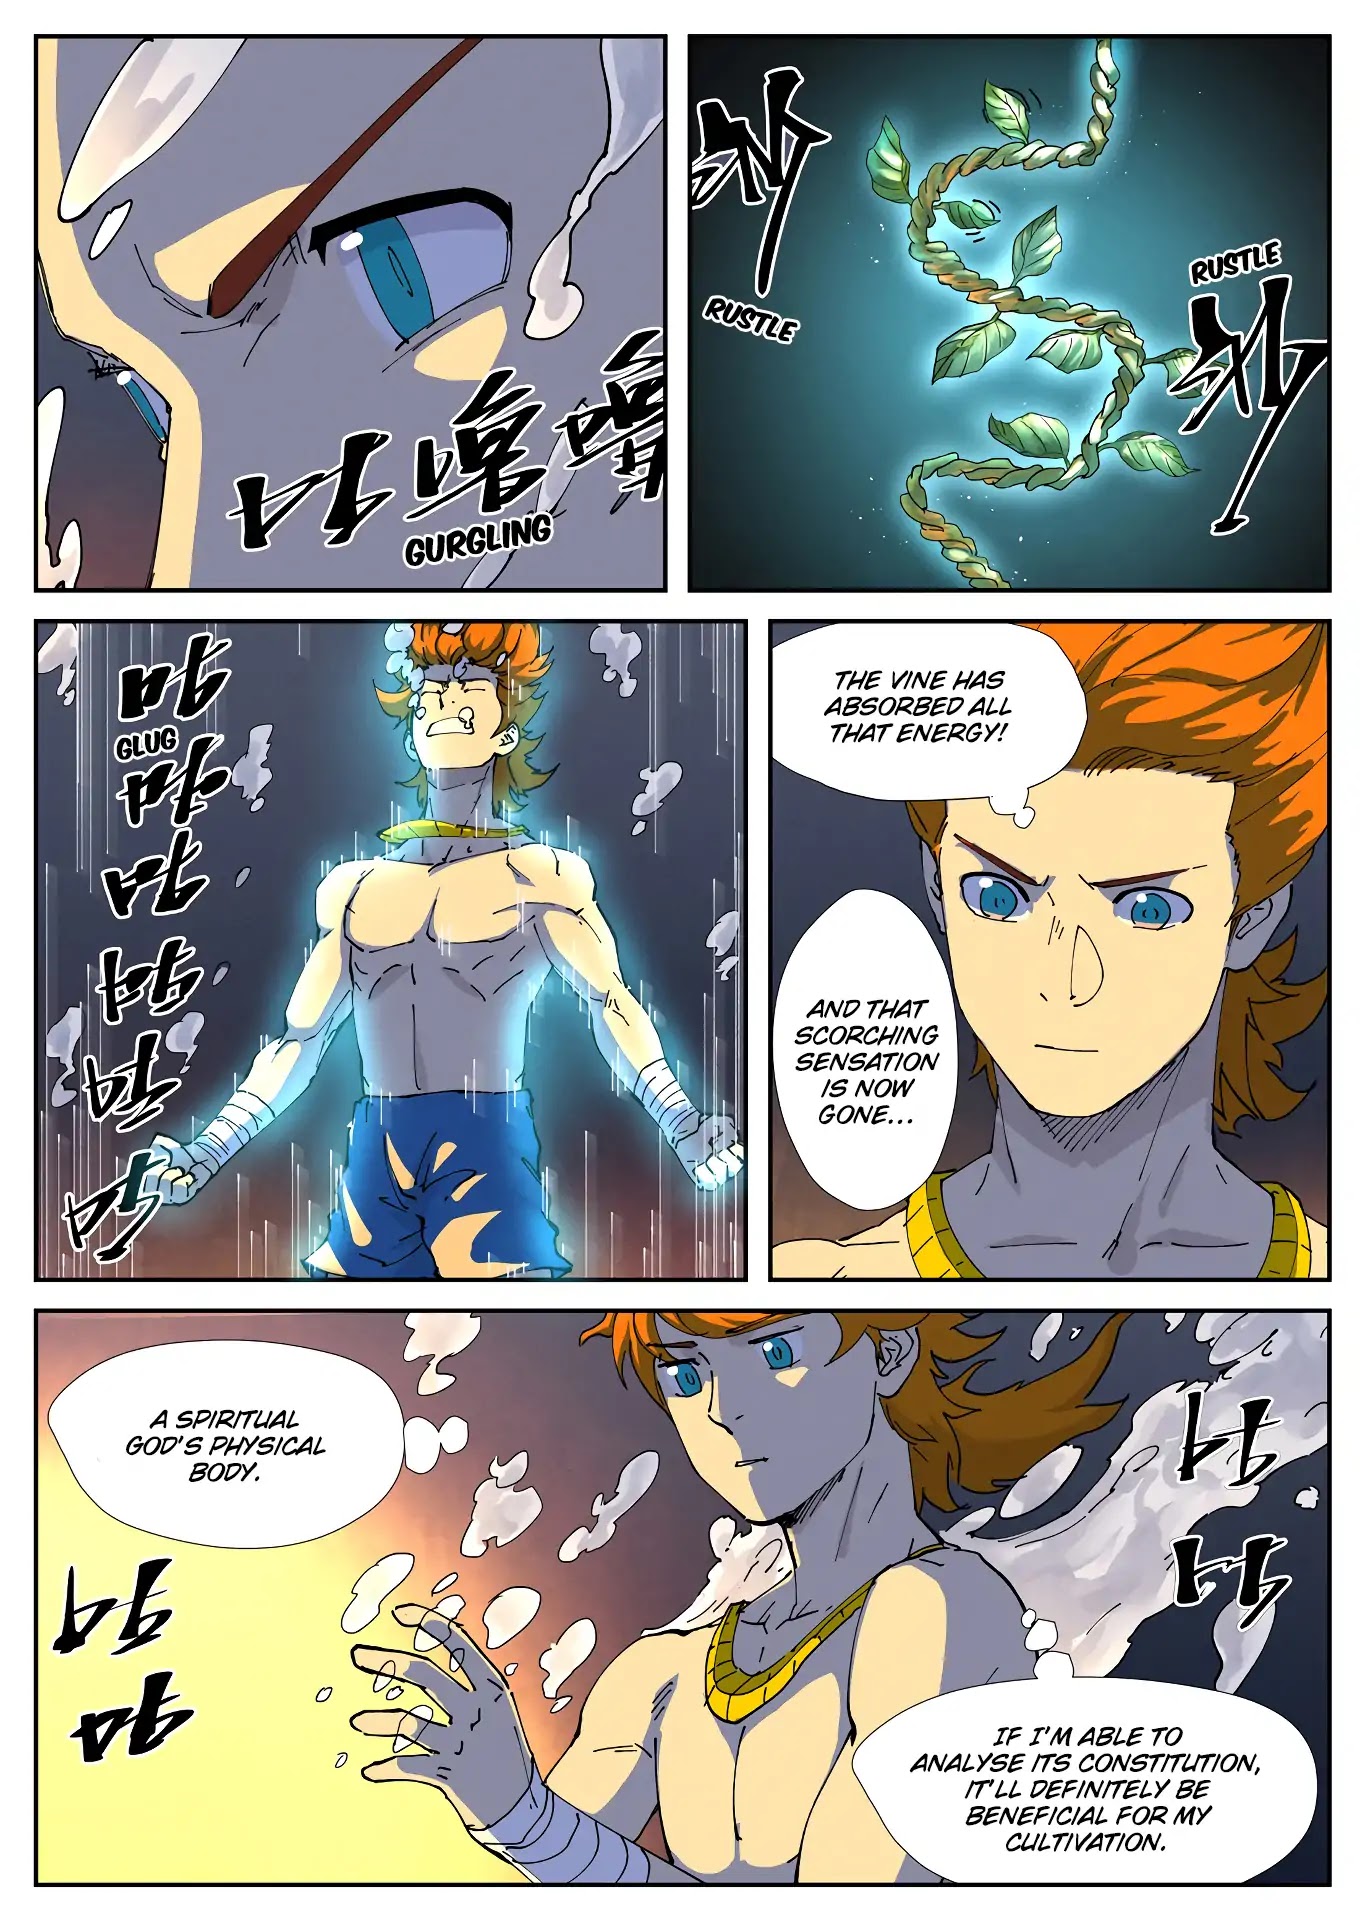 Tales of Demons and Gods Chapter 225: The Object at the Bottom of the Pool